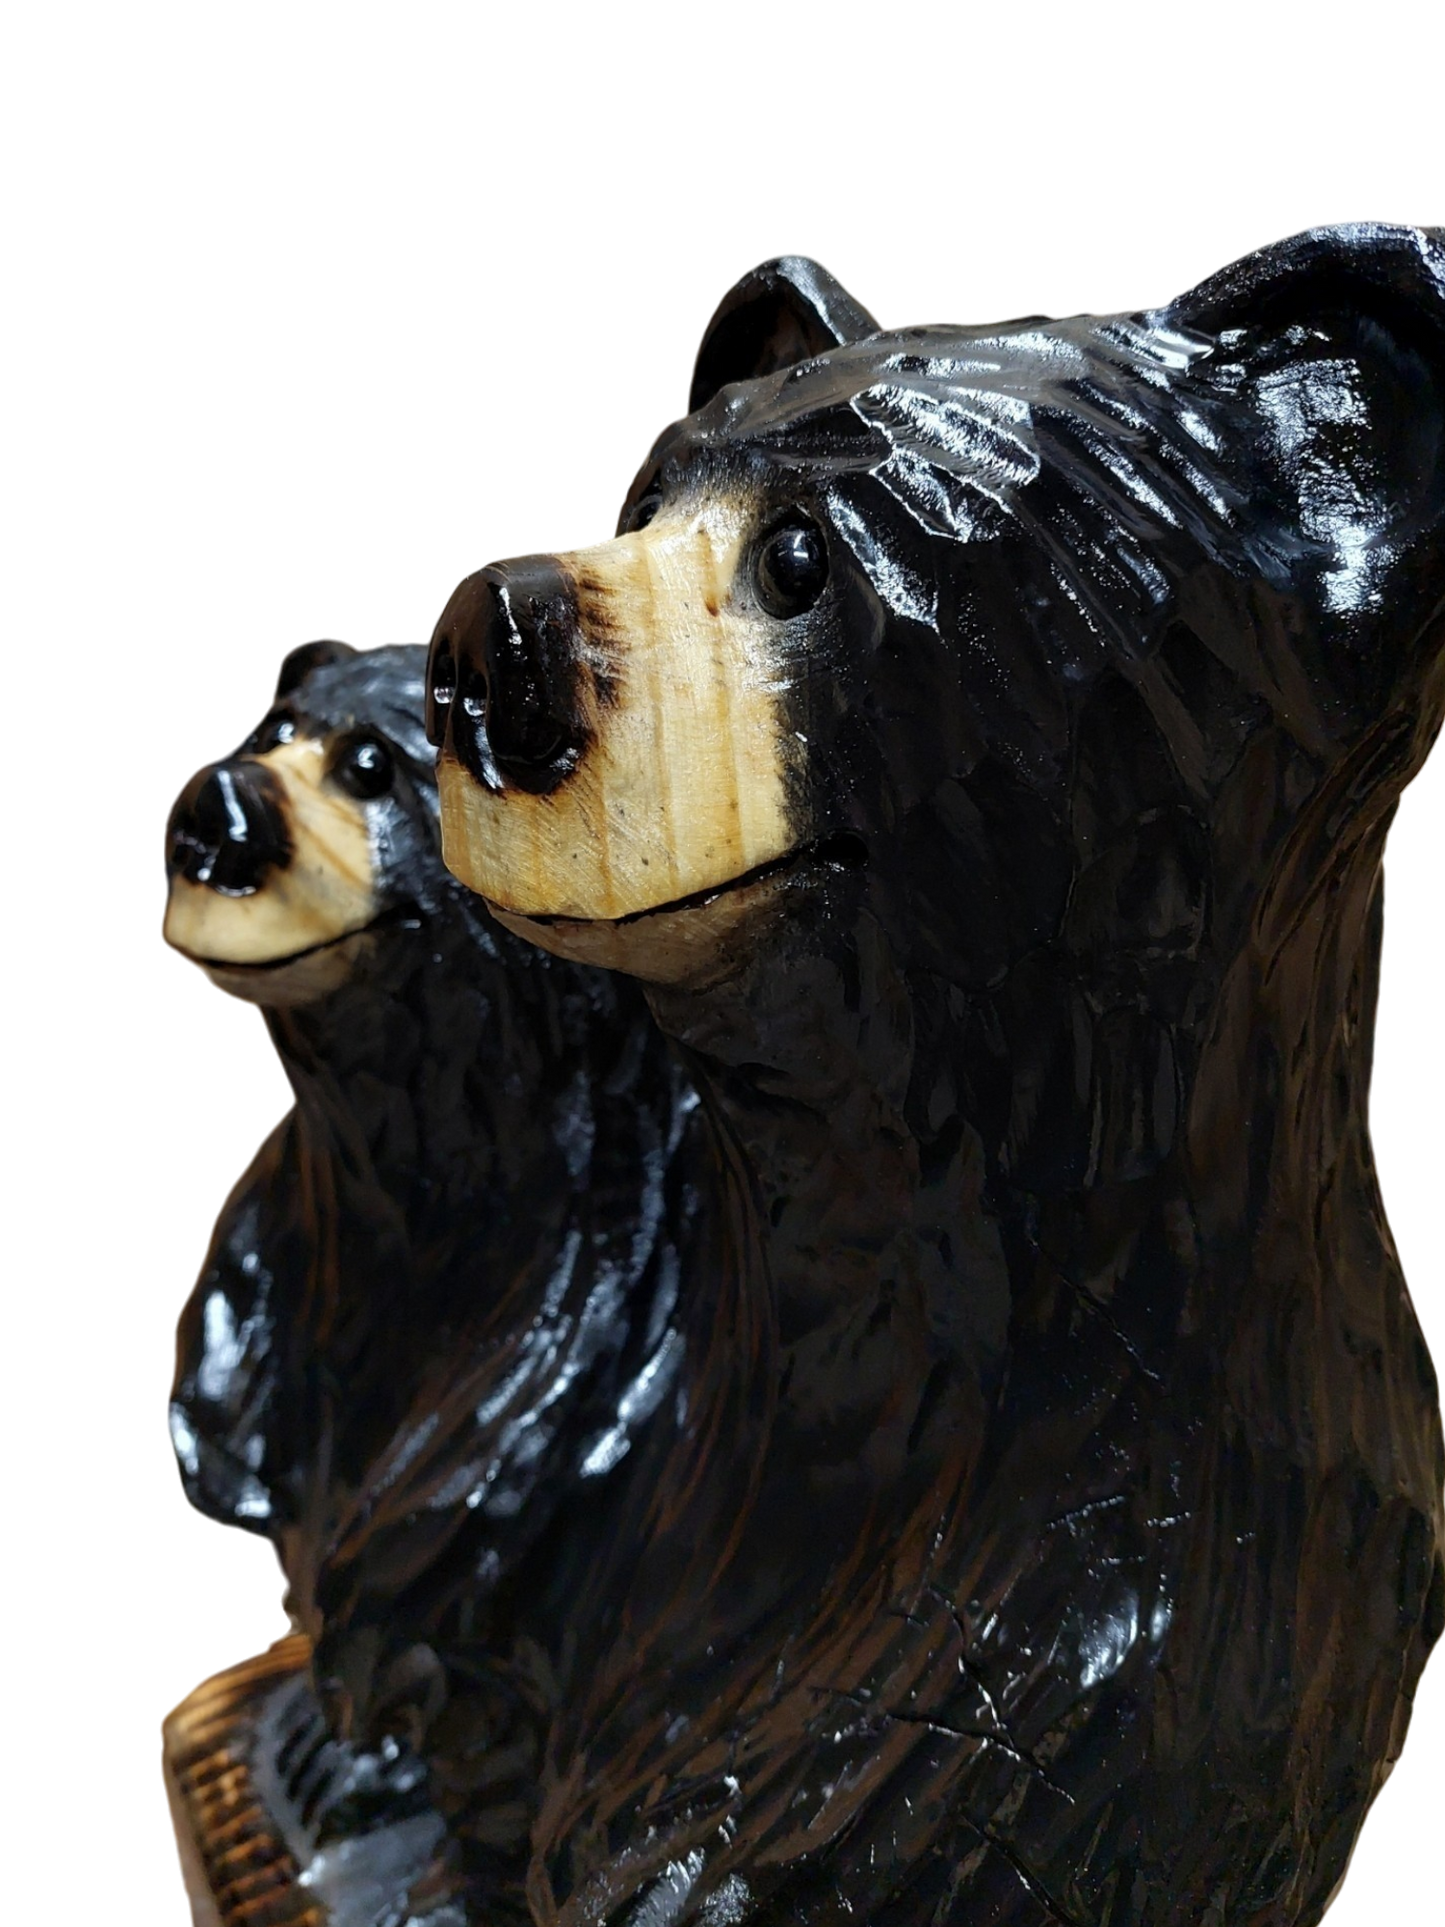 Hand Crafted Bear Couple- 24"